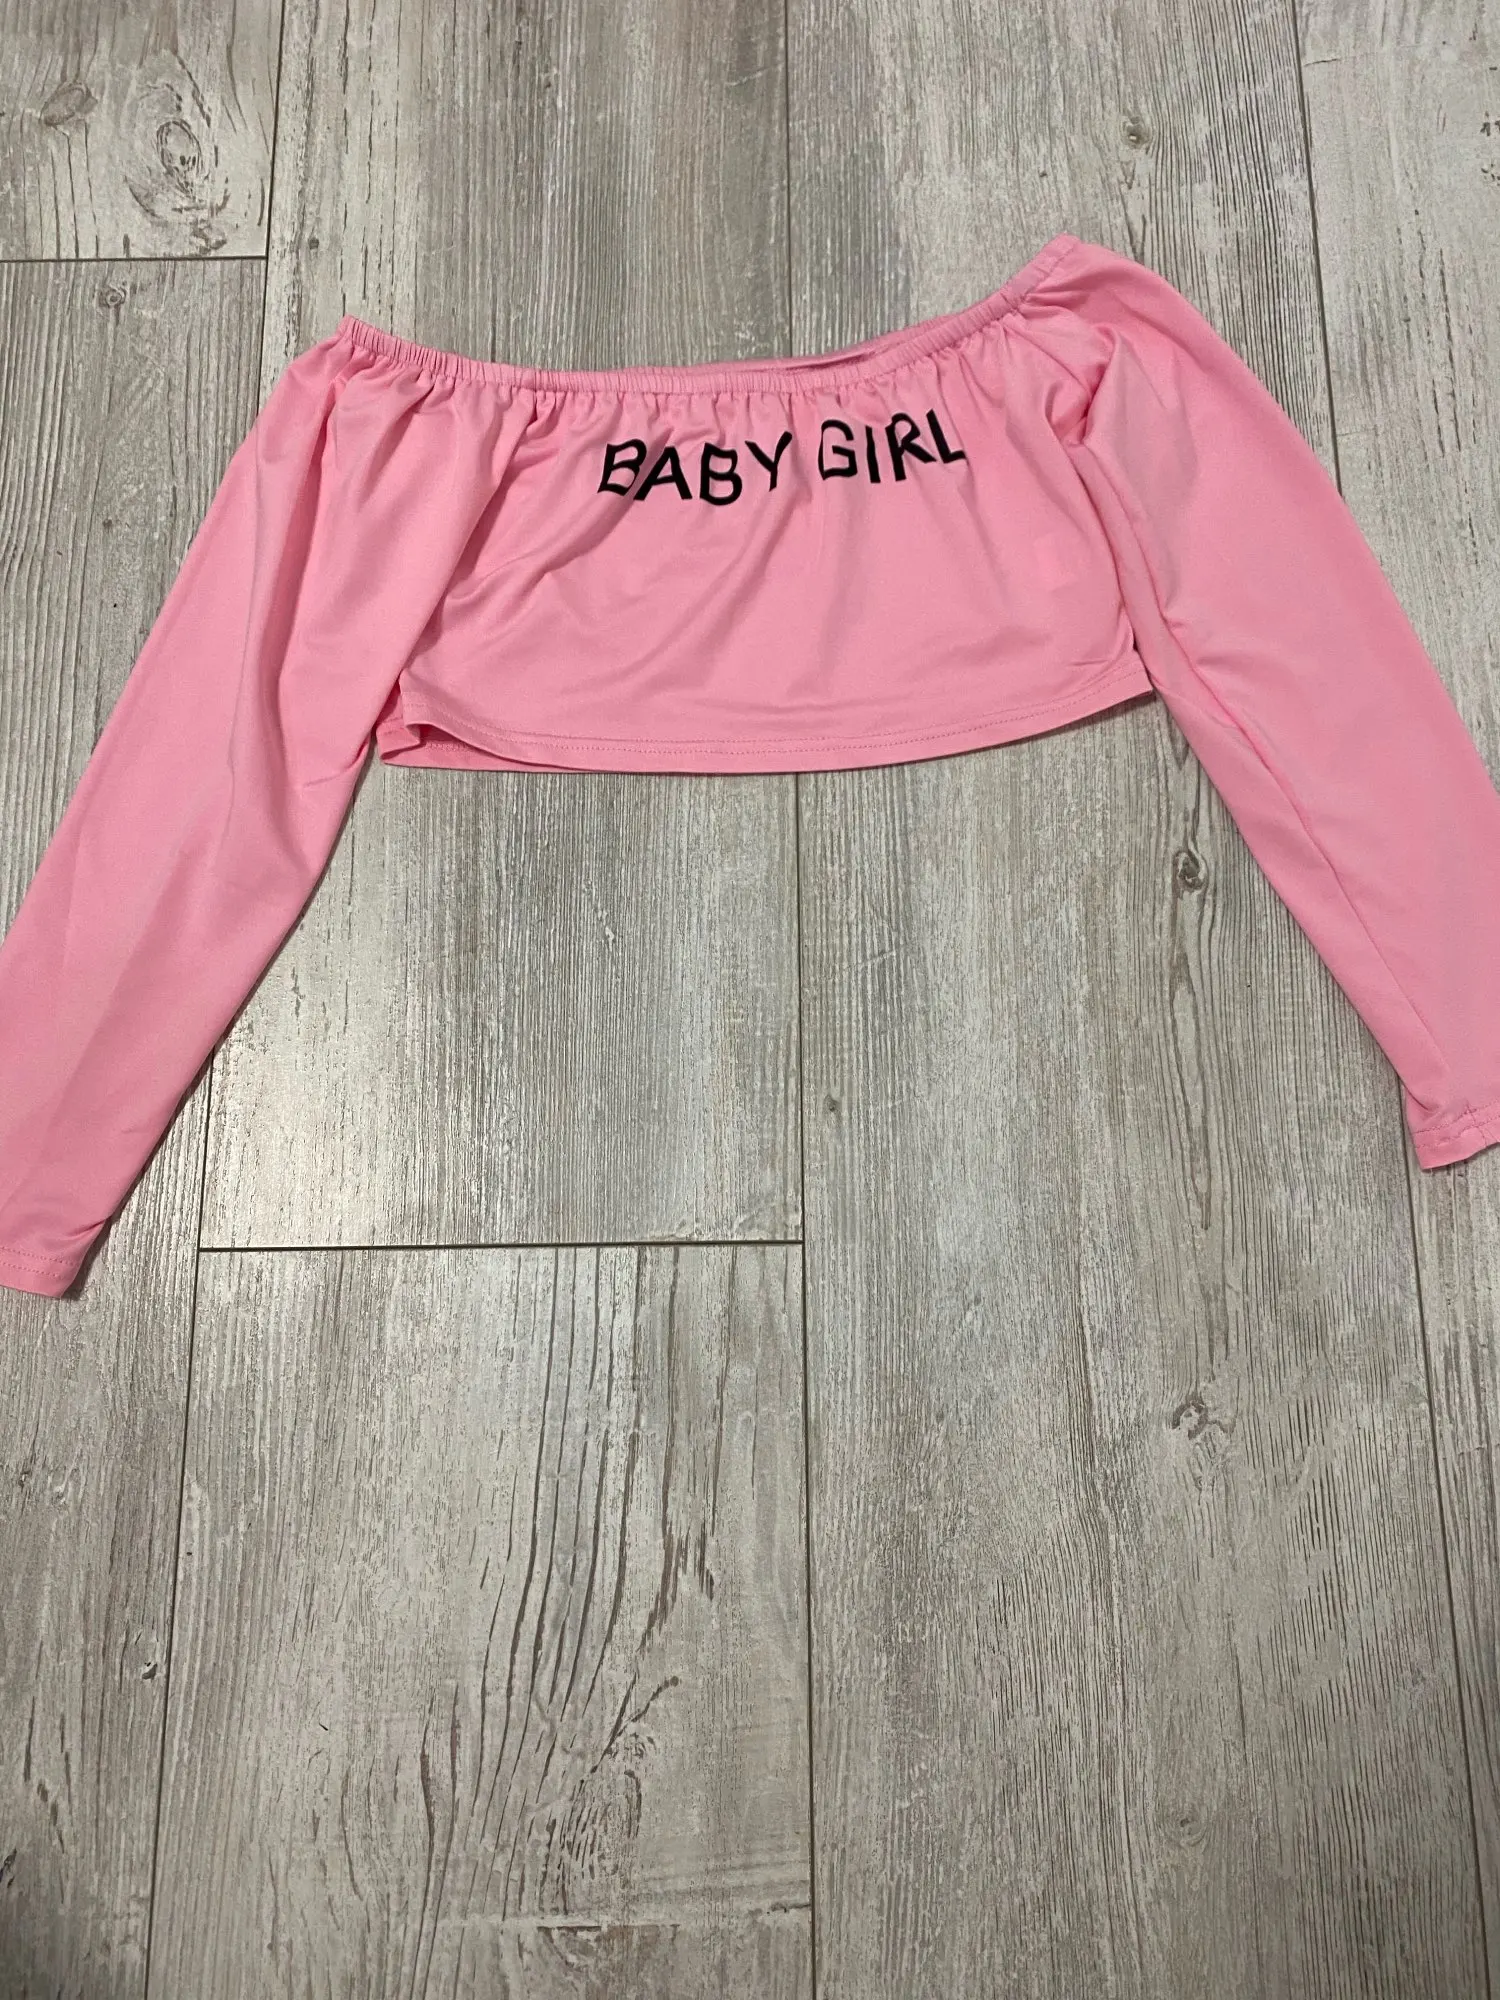 Rosalía outfit at Coachella 2019  Tracksuit women, Girly fashion pink, Louis  vuitton tracksuit